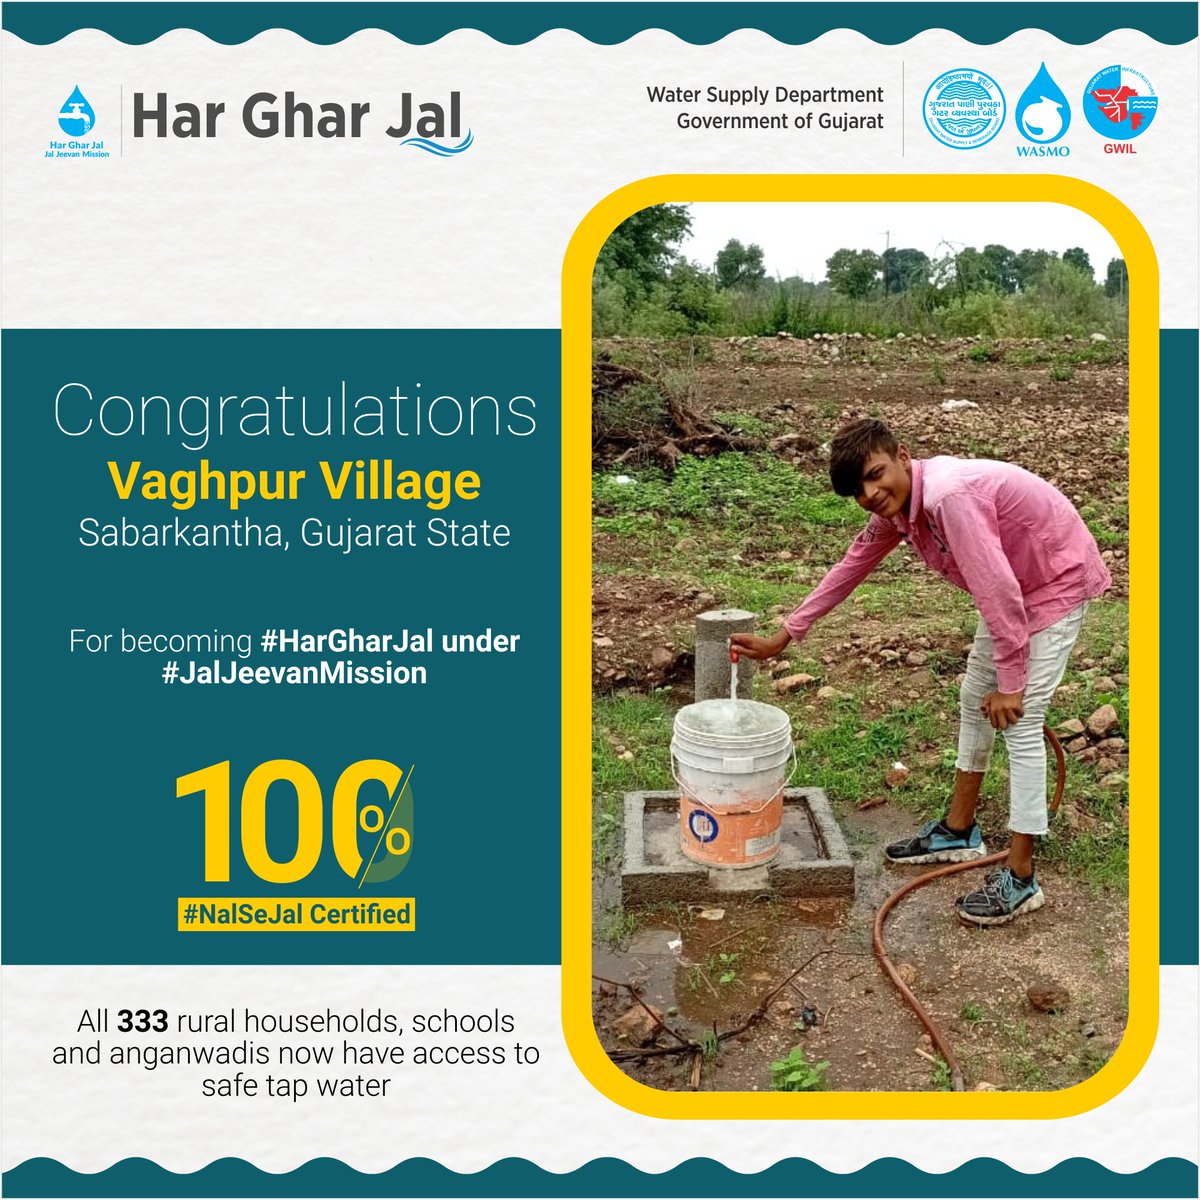 Congratulations to all the people of Vaghpur Village of #Sabarkantha, #Gujarat State, for becoming 100% #HarGharNalSeJal certified. All 333 rural households, schools and anganwadis are now getting safe tap water under #JalJeevanMission